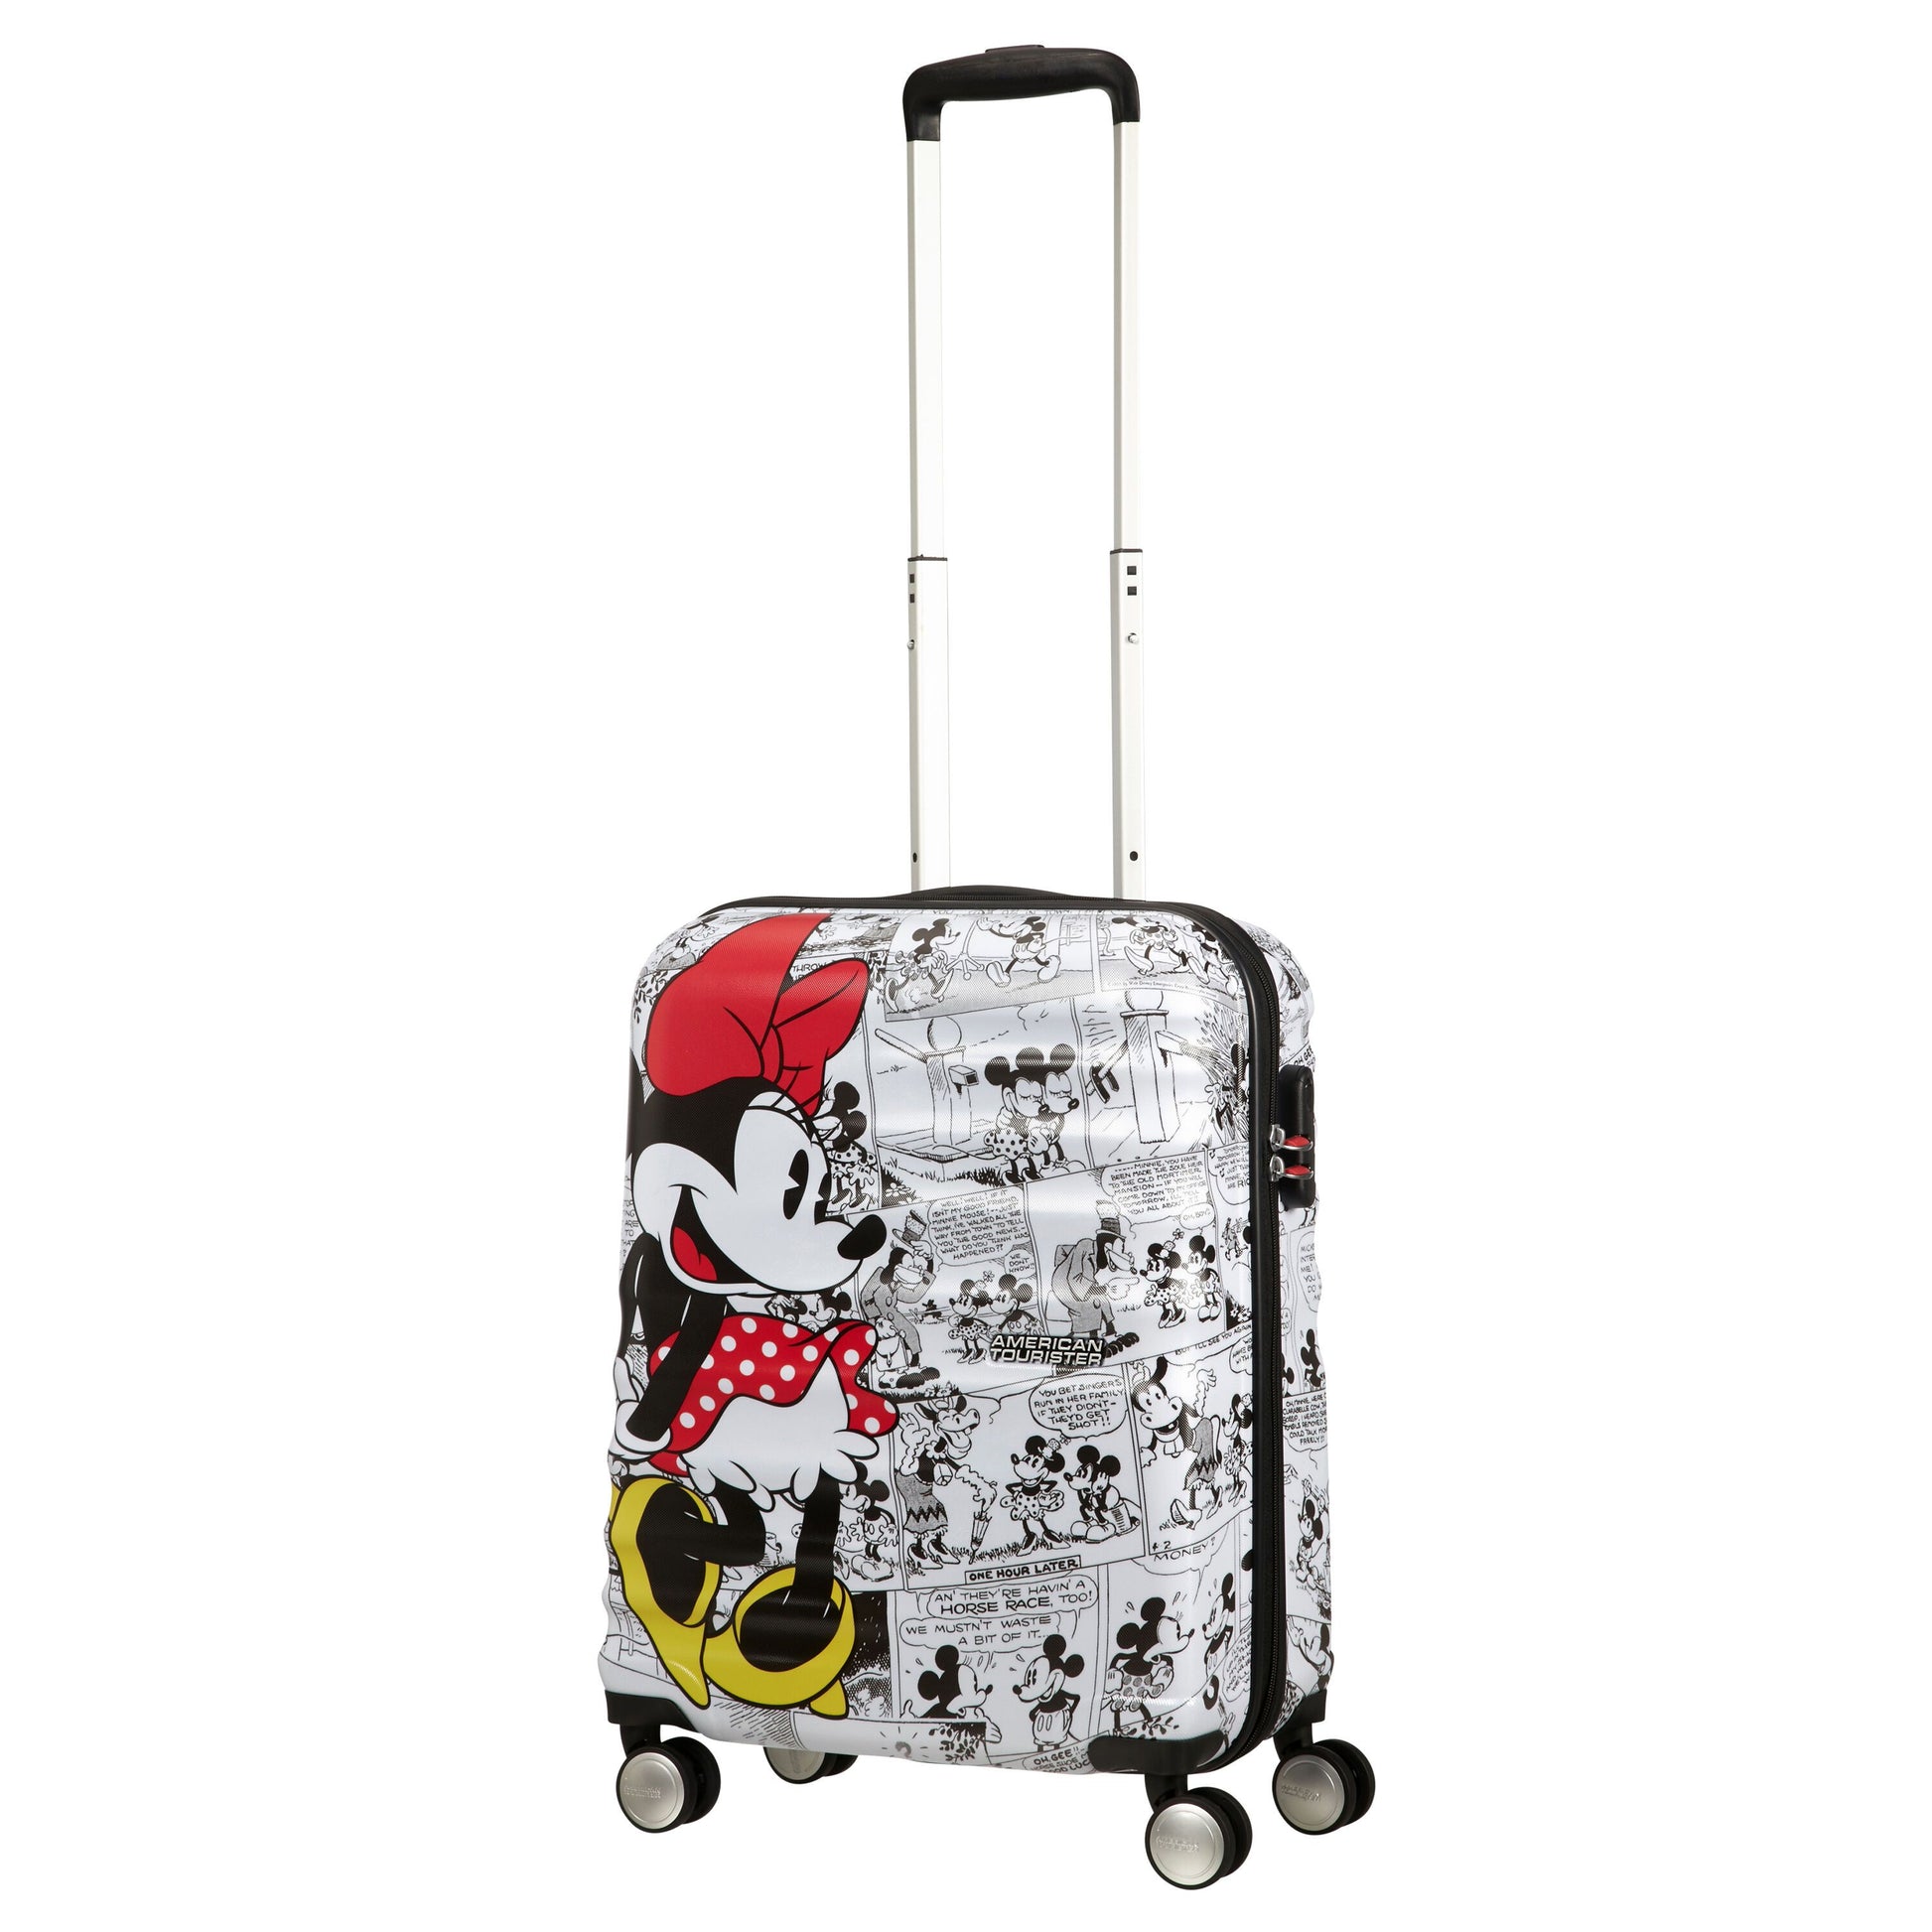 American Tourister Disney Wavebreaker Carry-On Spinner Luggage - Minnie Comics White